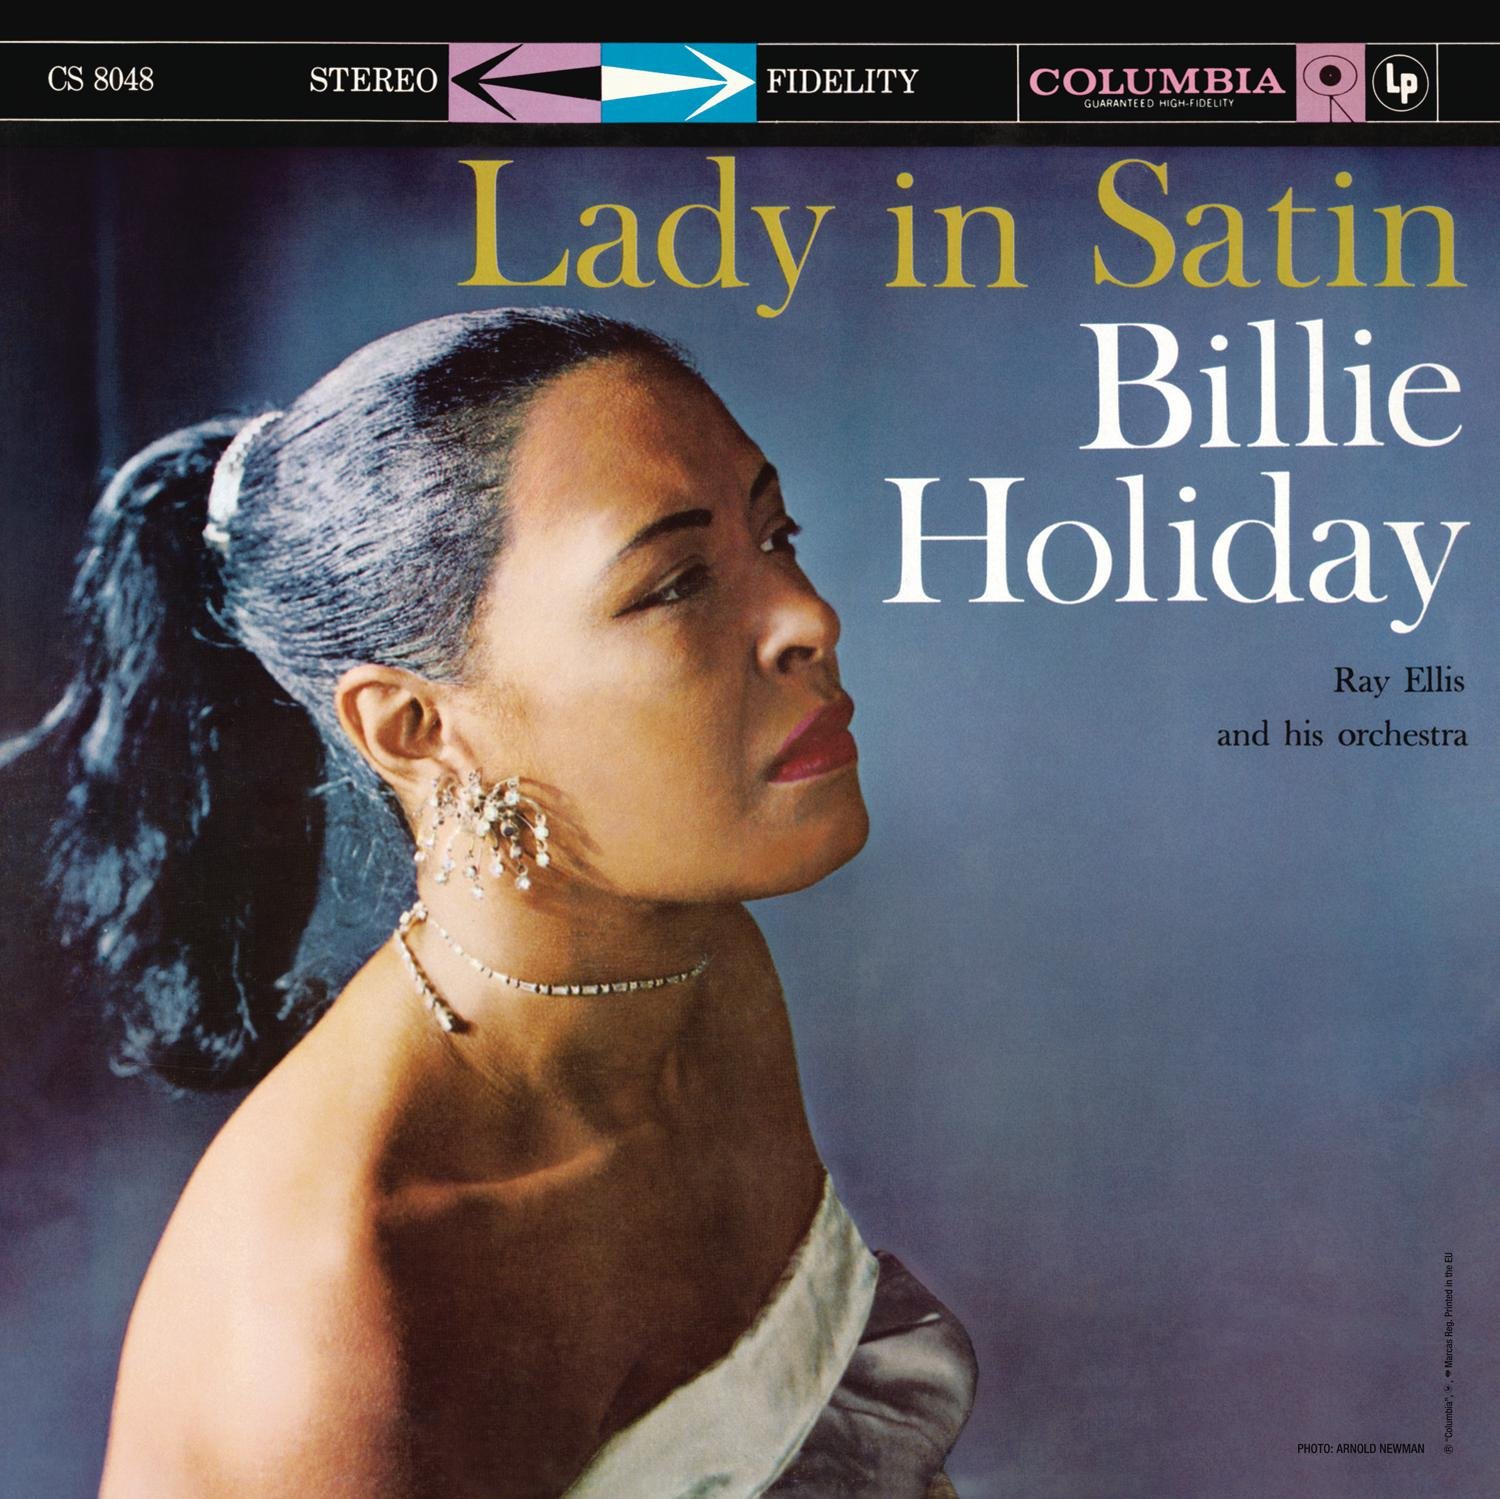 Billie Holiday - Lady in Satin (1958)​